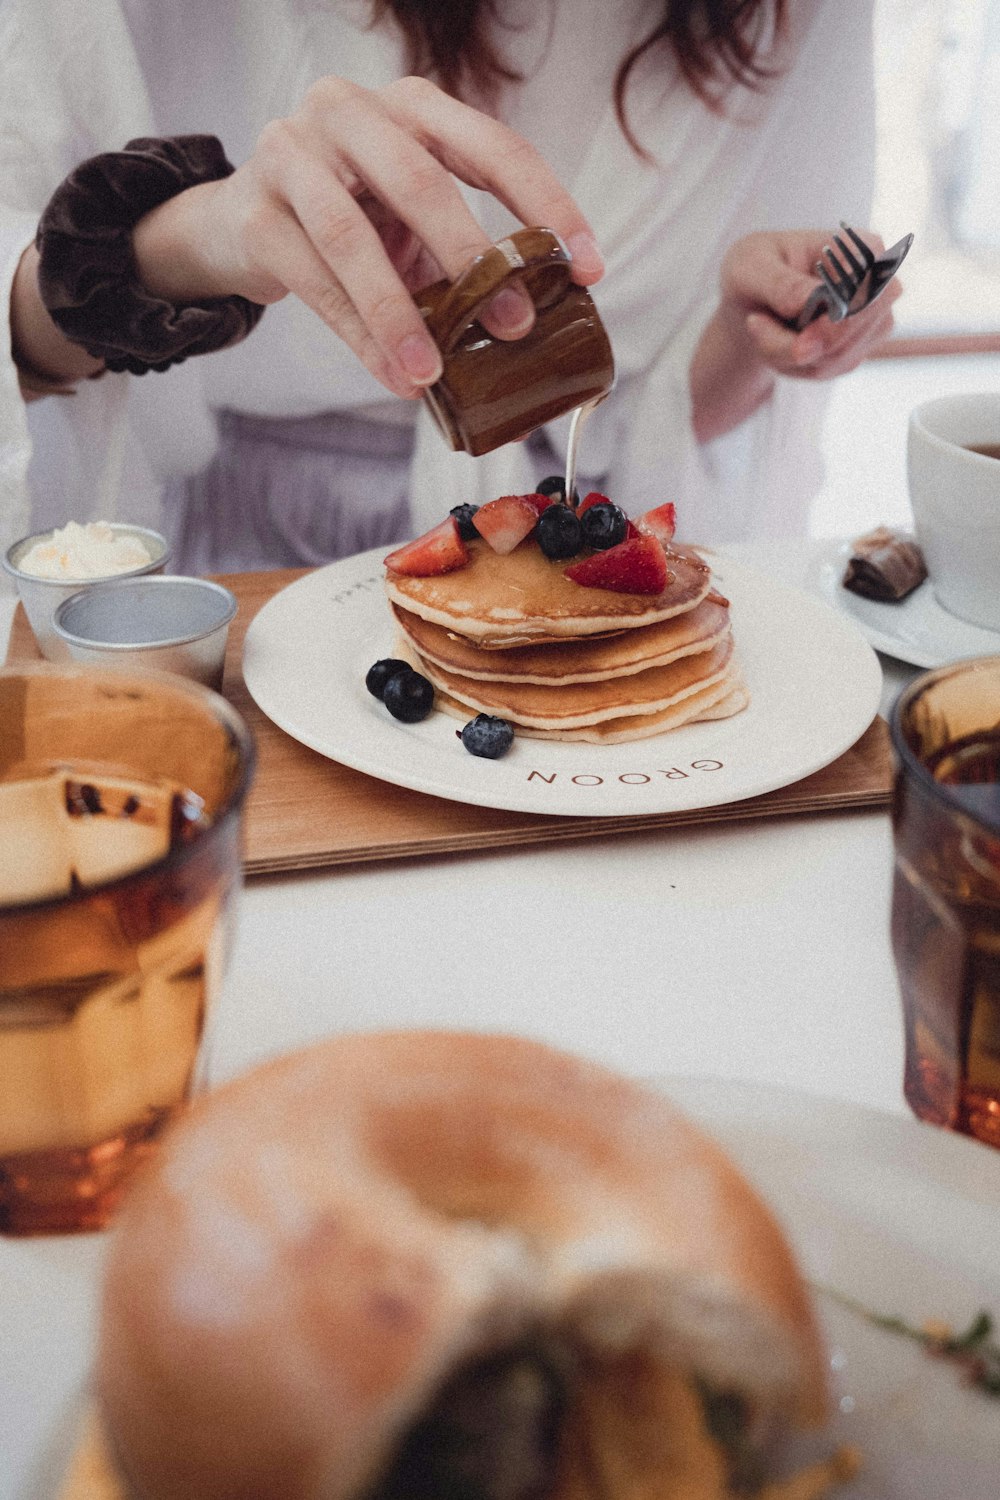 a woman is pouring syrup on a stack of pancakes